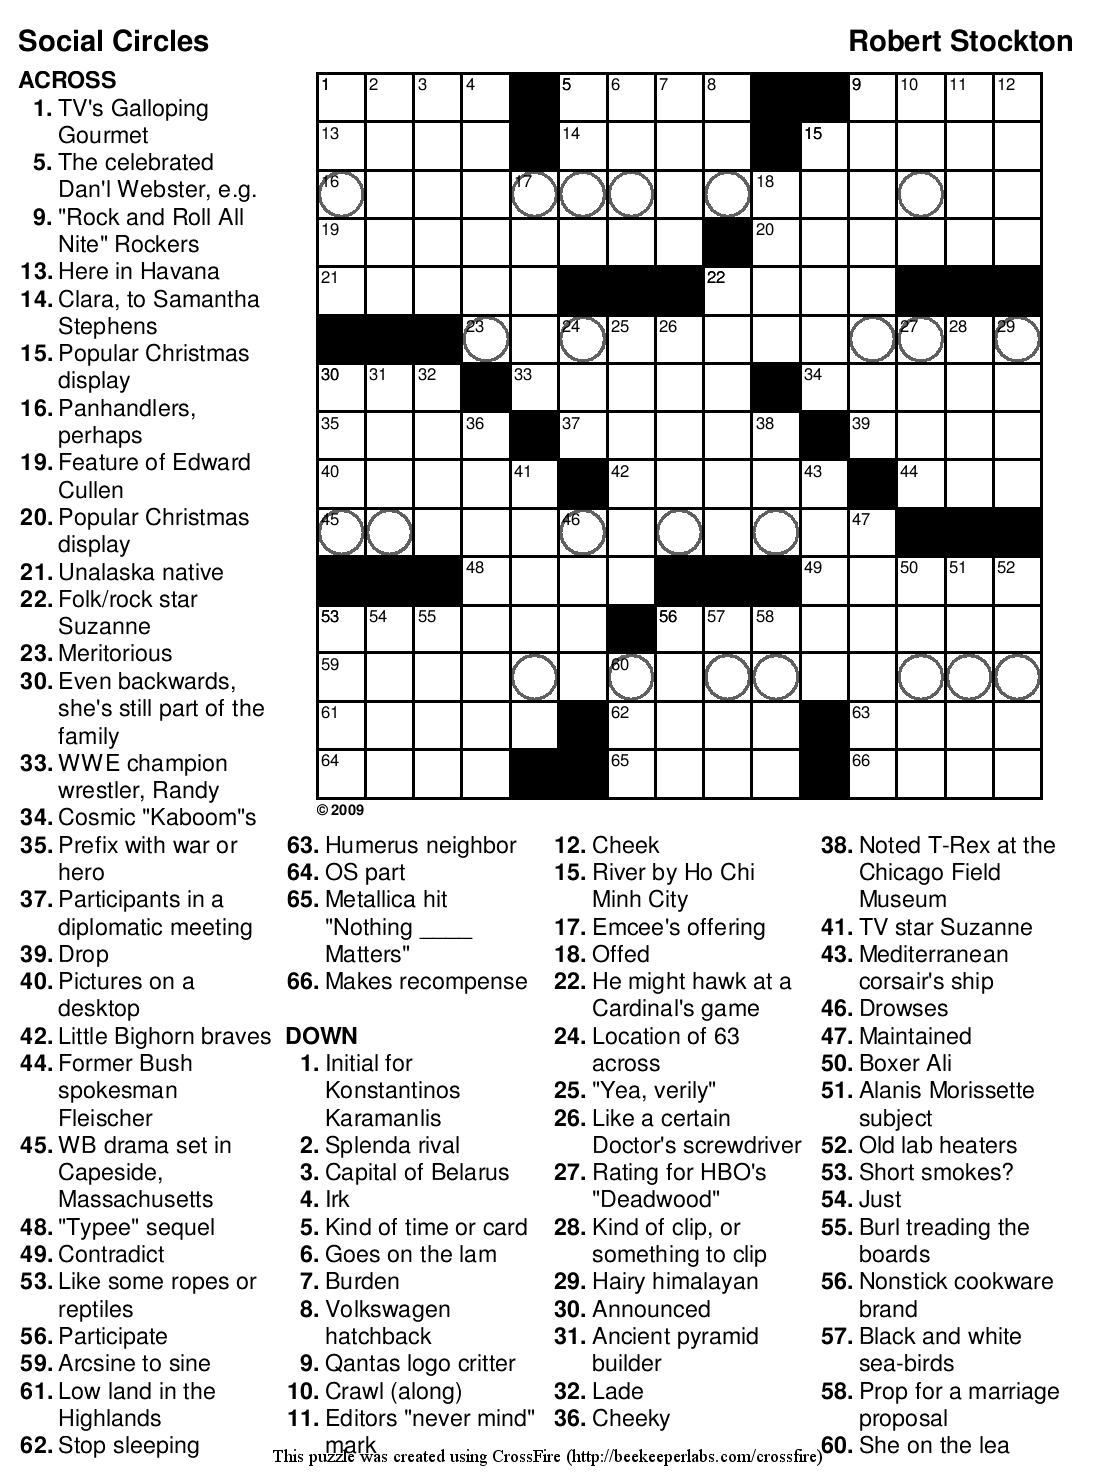 Crossword Puzzles Printable - Yahoo Image Search Results | Crossword - Free Online Printable Crossword Puzzles